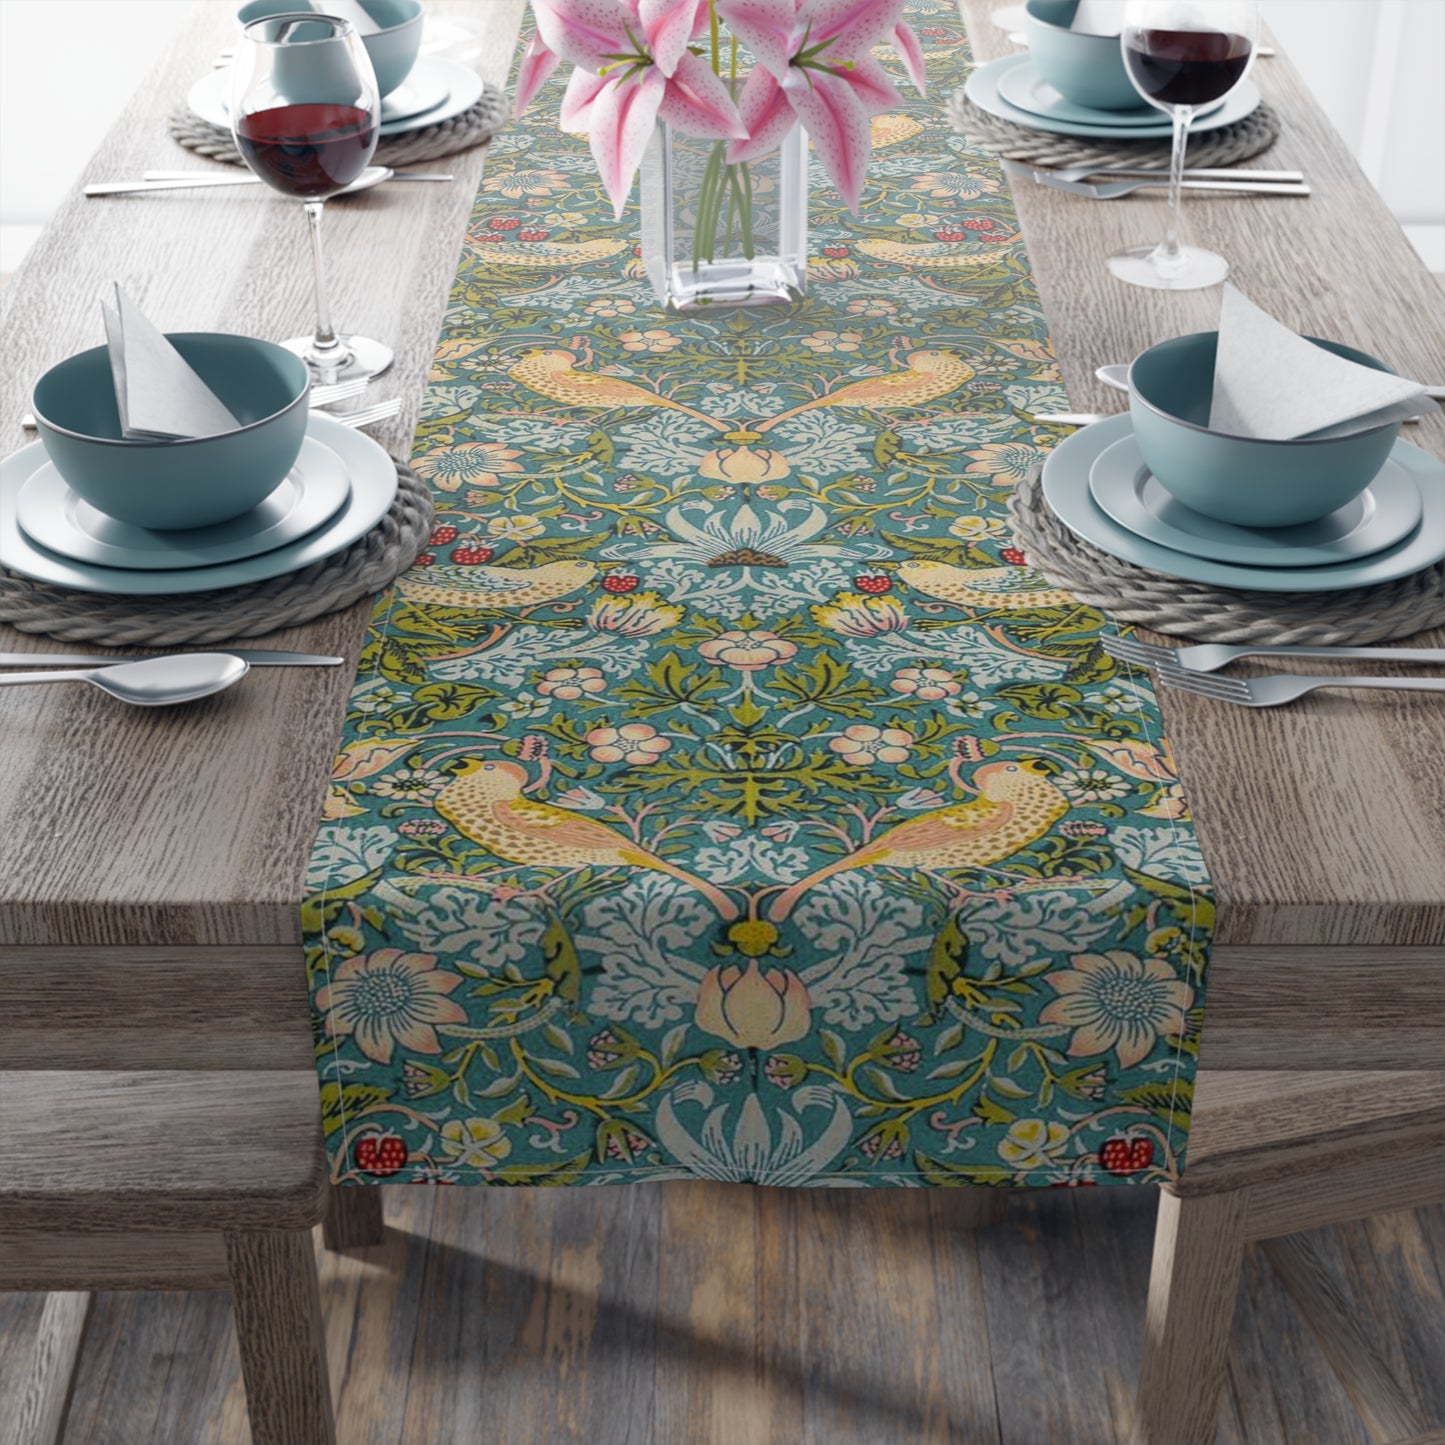 william-morris-co-table-runner-strawberry-thief-collection-duck-egg-blue-3